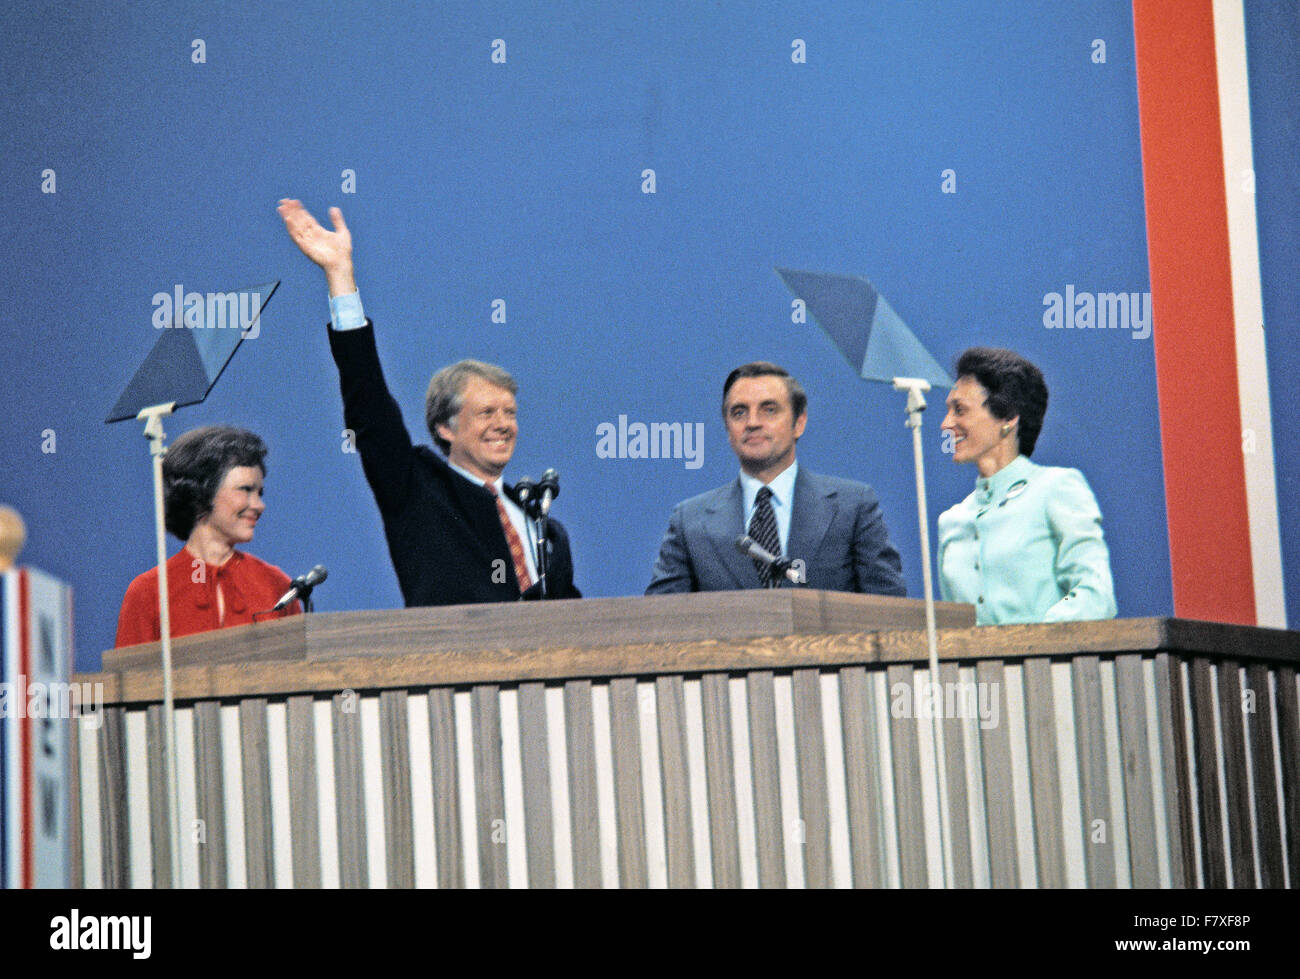 Governor Jimmy Carter (Democrat of Georgia), the 1976 Democratic Party nominee for President of the United States, left center, and US Senator Walter Mondale (Democrat of Minnesota), the 1976 Democratic Party nominee for Vice President of the US, right center, and their wives Rosalynn Carter, left, and Joan Mondale, right, acknowledge the cheers of the delegates following their acceptance speeches at the 1976 Democratic Convention at Madison Square Garden, New York, New York on July 15, 1976. Credit: Arnie Sachs/CNP - NO WIRE SERVICE - Stock Photo